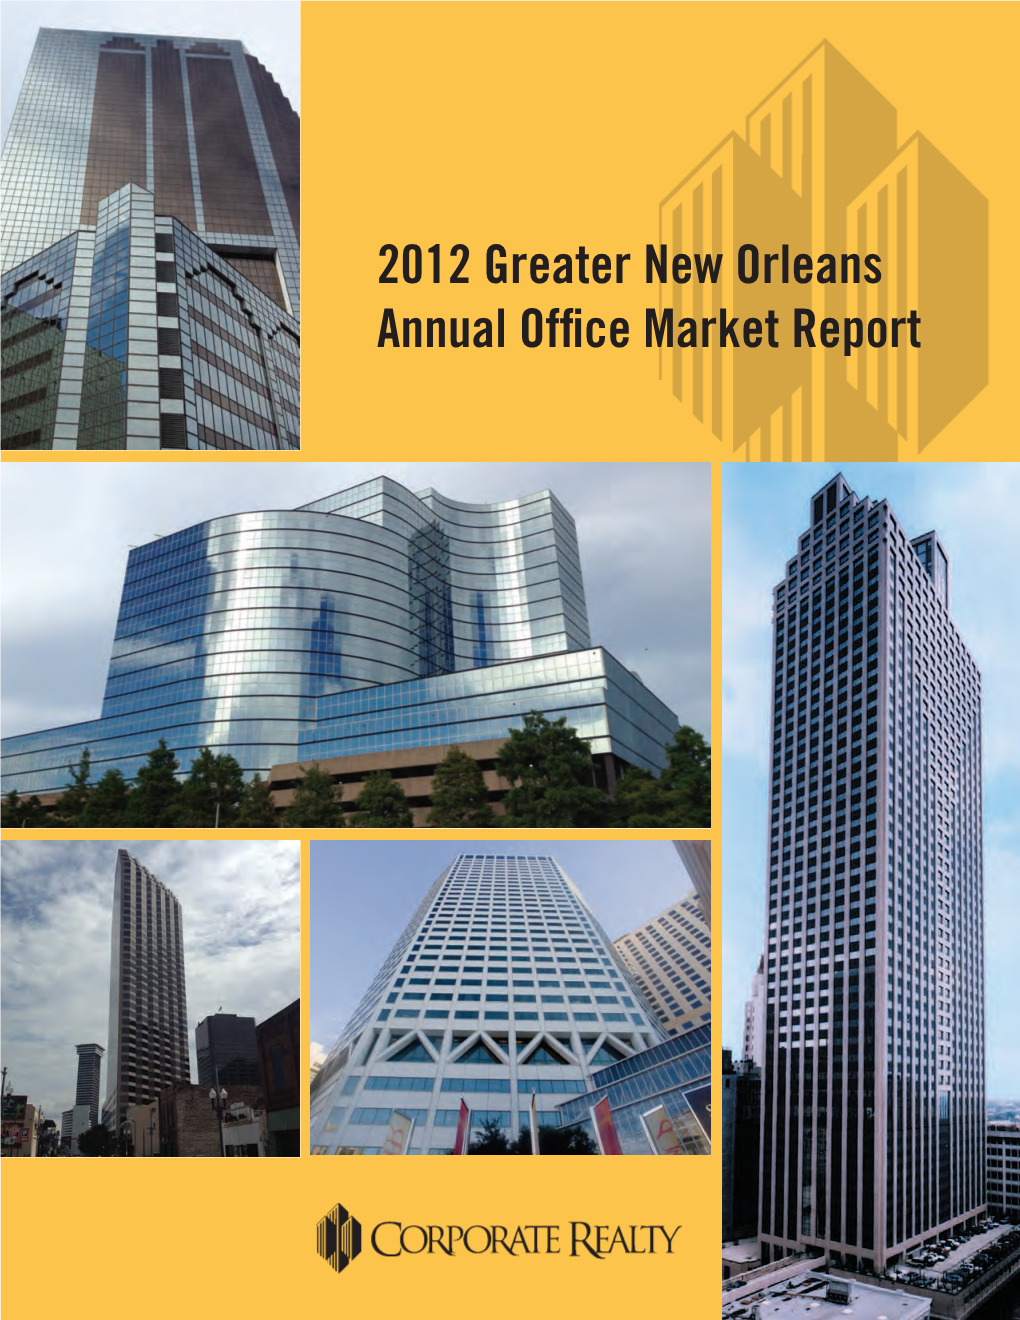 2012 Greater New Orleans Annual Office Market Report